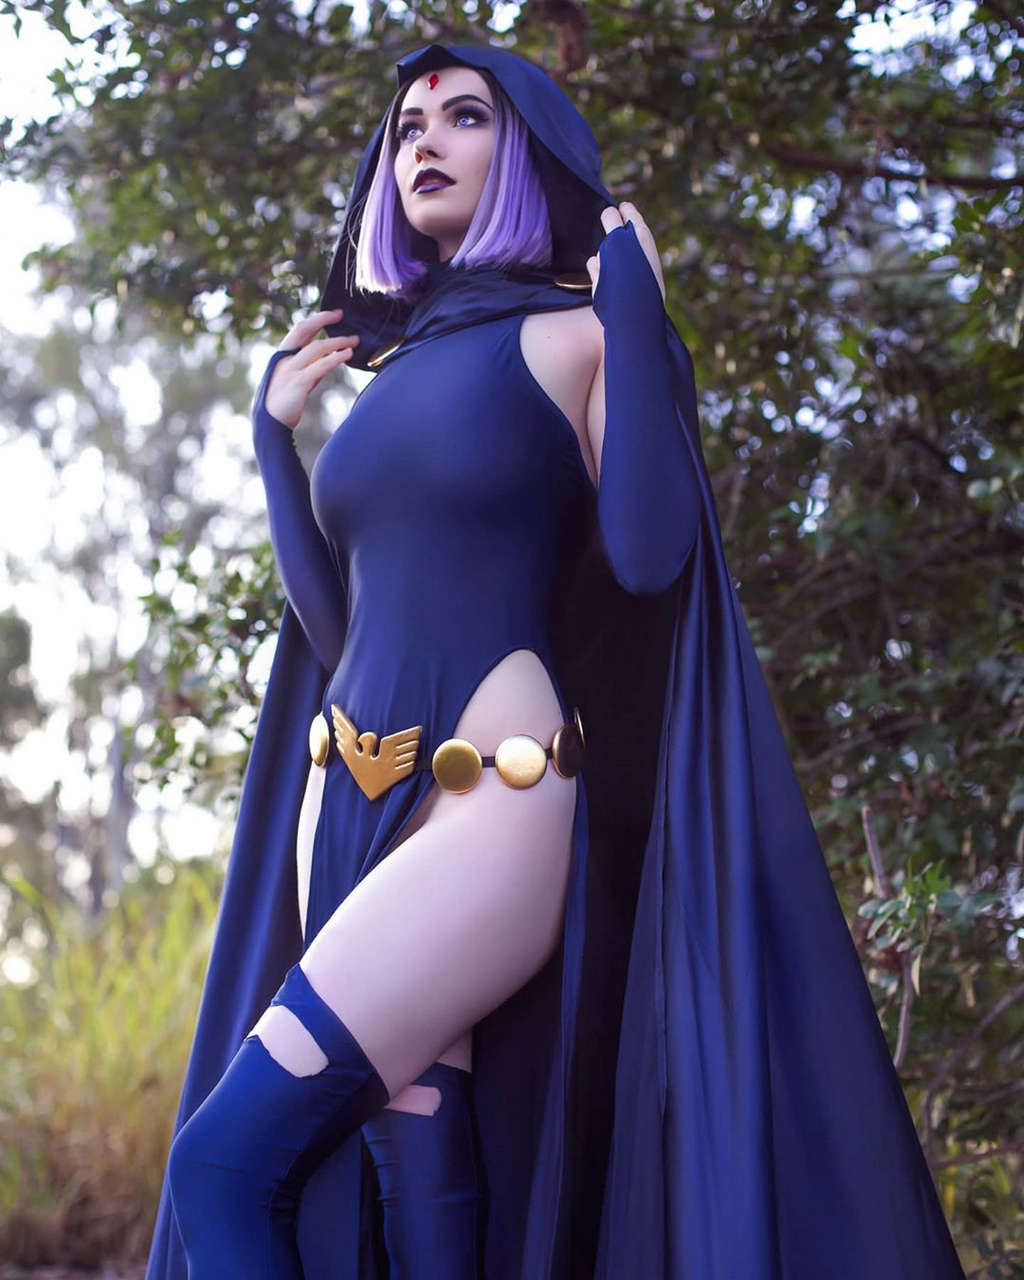 Nichameleon As Raven Shes Amazing One Of My Favorite Cosplayer